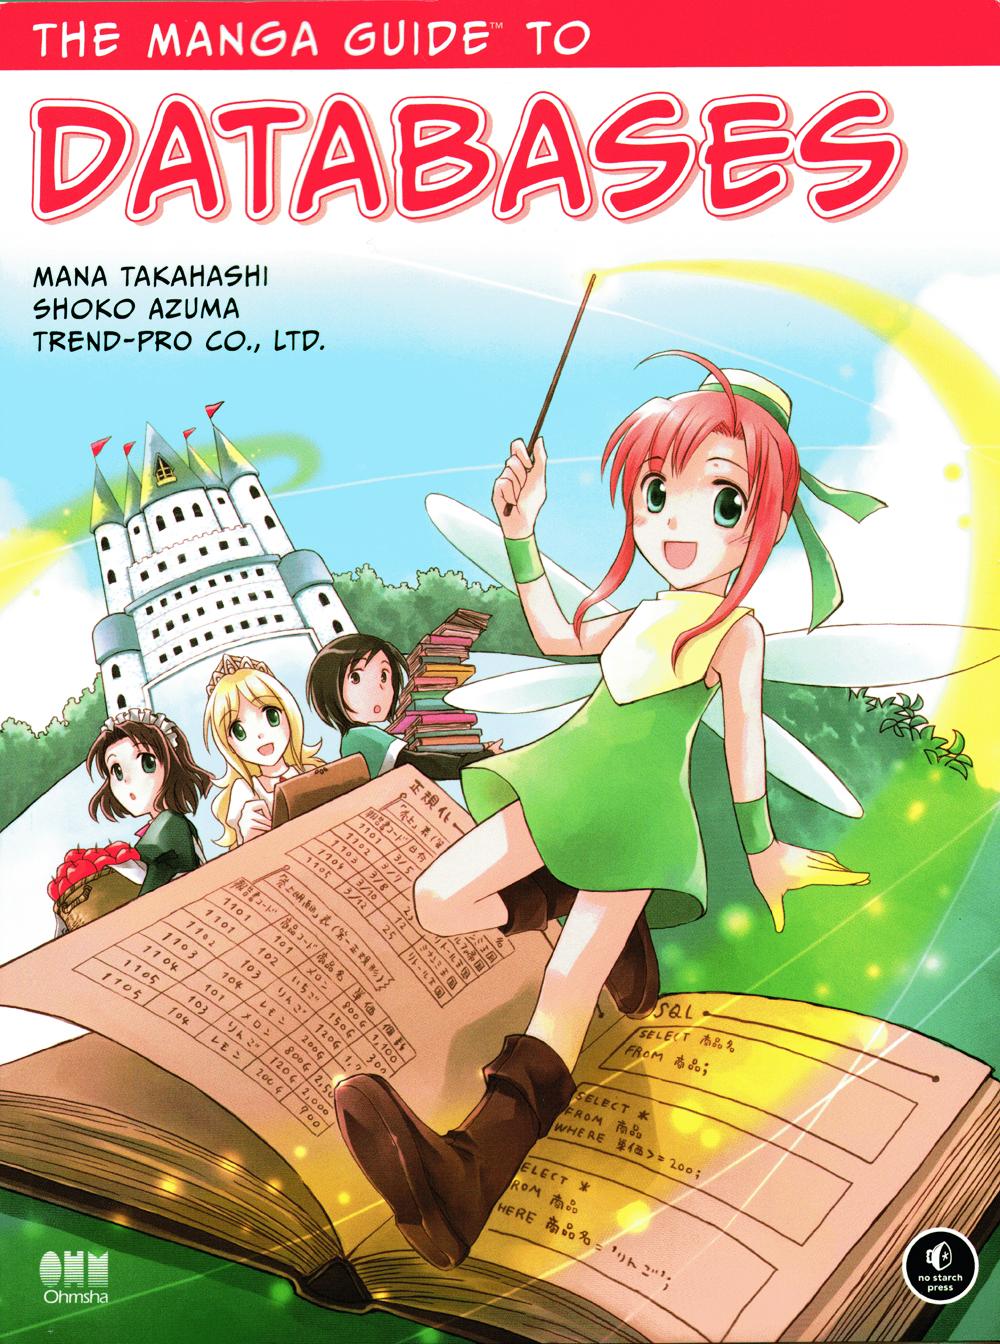 Mana Takahashi. (2008). The Manga Guide to Databases. English Edition. No Starch Press. What is a Database?